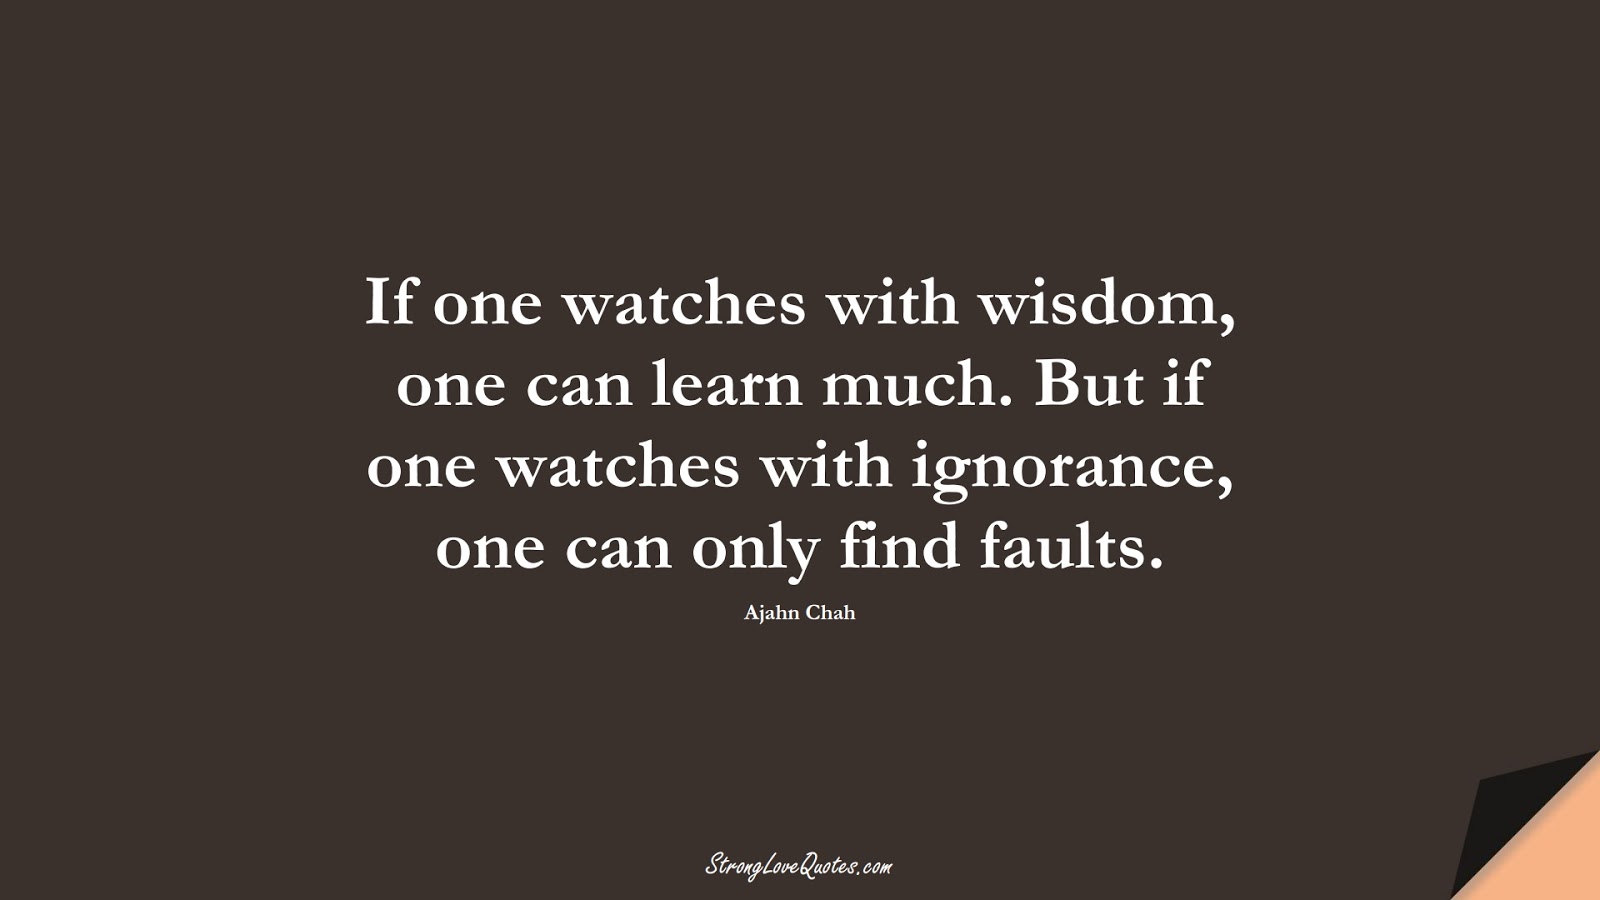 If one watches with wisdom, one can learn much. But if one watches with ignorance, one can only find faults. (Ajahn Chah);  #LearningQuotes